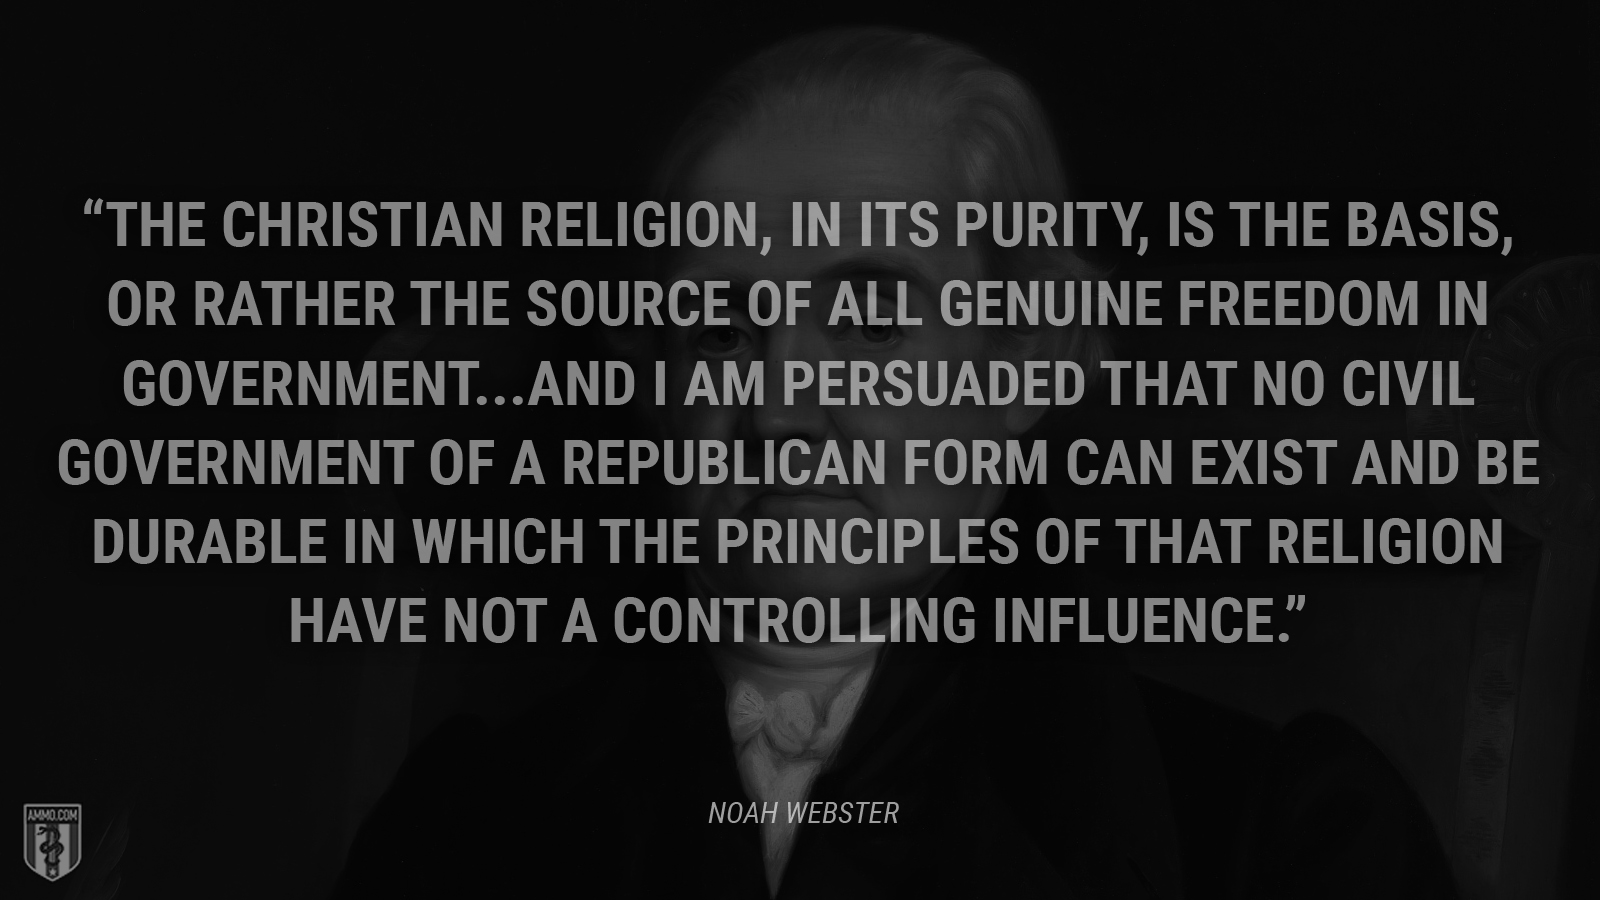 “The Christian religion, in its purity, is the basis, or rather the source of all genuine freedom in government. . . . and I am persuaded that no civil government of a republican form can exist and be durable in which the principles of that religion have not a controlling influence.” - Noah Webster